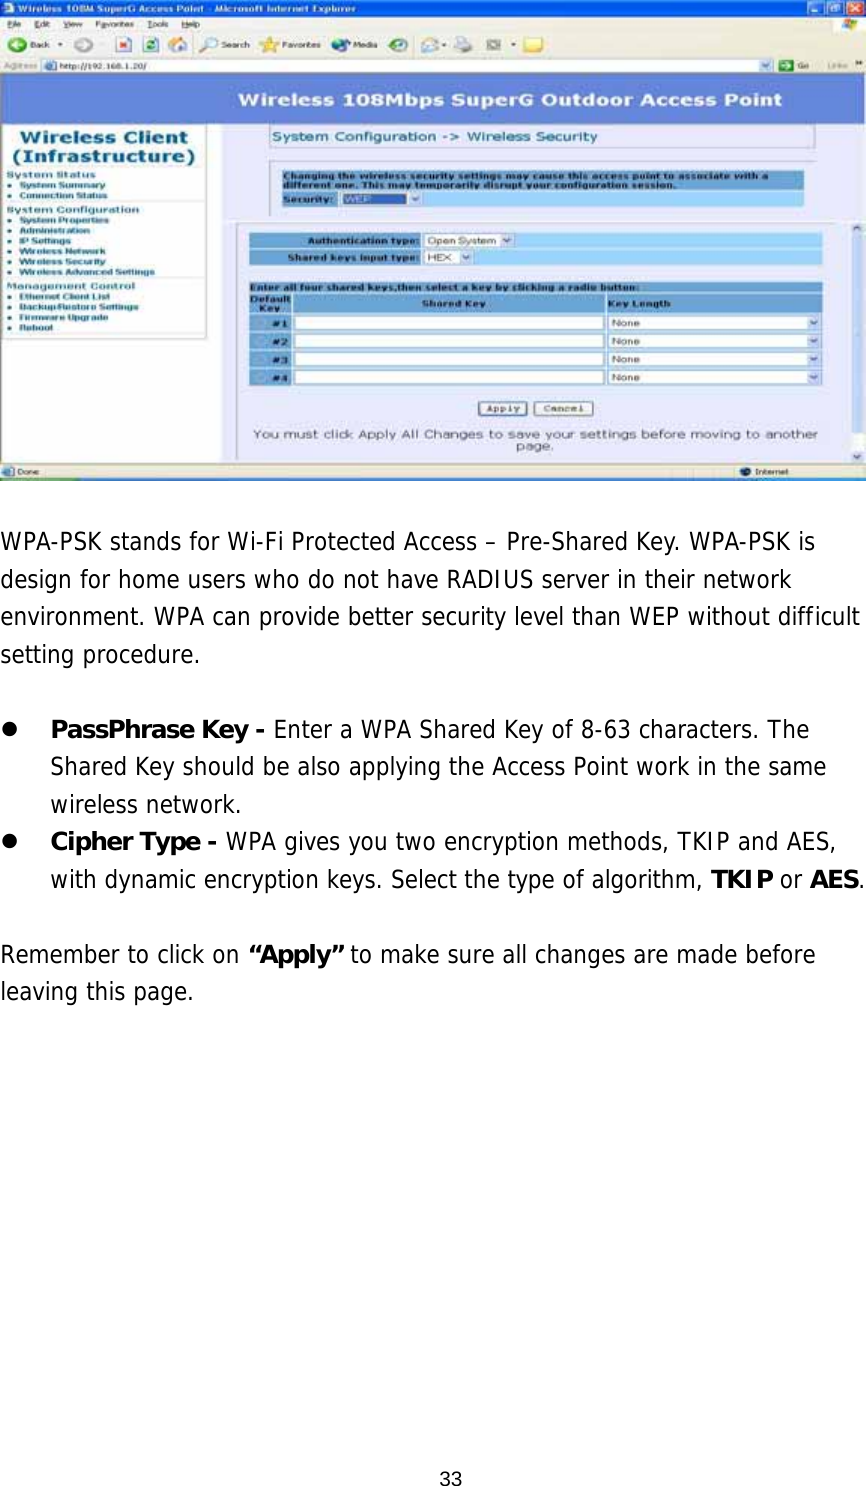  33  WPA-PSK stands for Wi-Fi Protected Access – Pre-Shared Key. WPA-PSK is design for home users who do not have RADIUS server in their network environment. WPA can provide better security level than WEP without difficult setting procedure.    PassPhrase Key - Enter a WPA Shared Key of 8-63 characters. The Shared Key should be also applying the Access Point work in the same wireless network.   Cipher Type - WPA gives you two encryption methods, TKIP and AES, with dynamic encryption keys. Select the type of algorithm, TKIP or AES.   Remember to click on “Apply” to make sure all changes are made before leaving this page.   